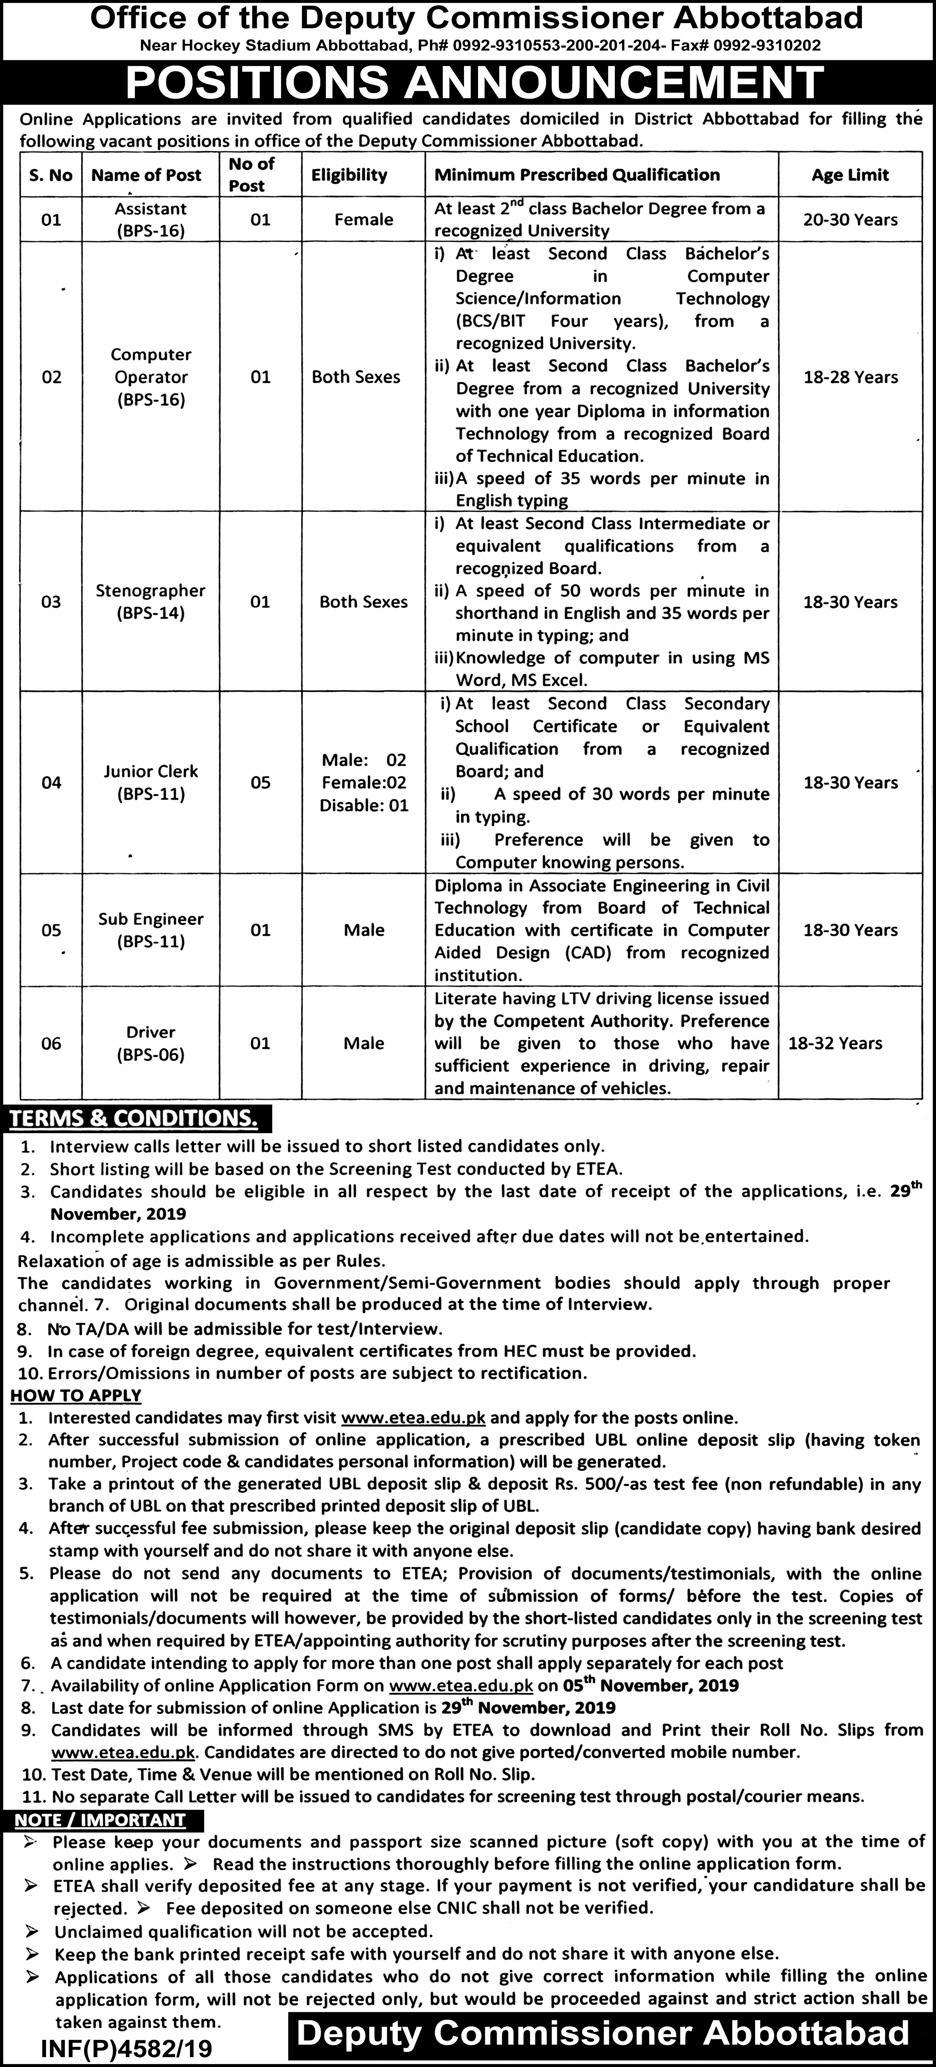 Jobs In Office of The Deputy Commissioner Abbottabad 01 November 2019